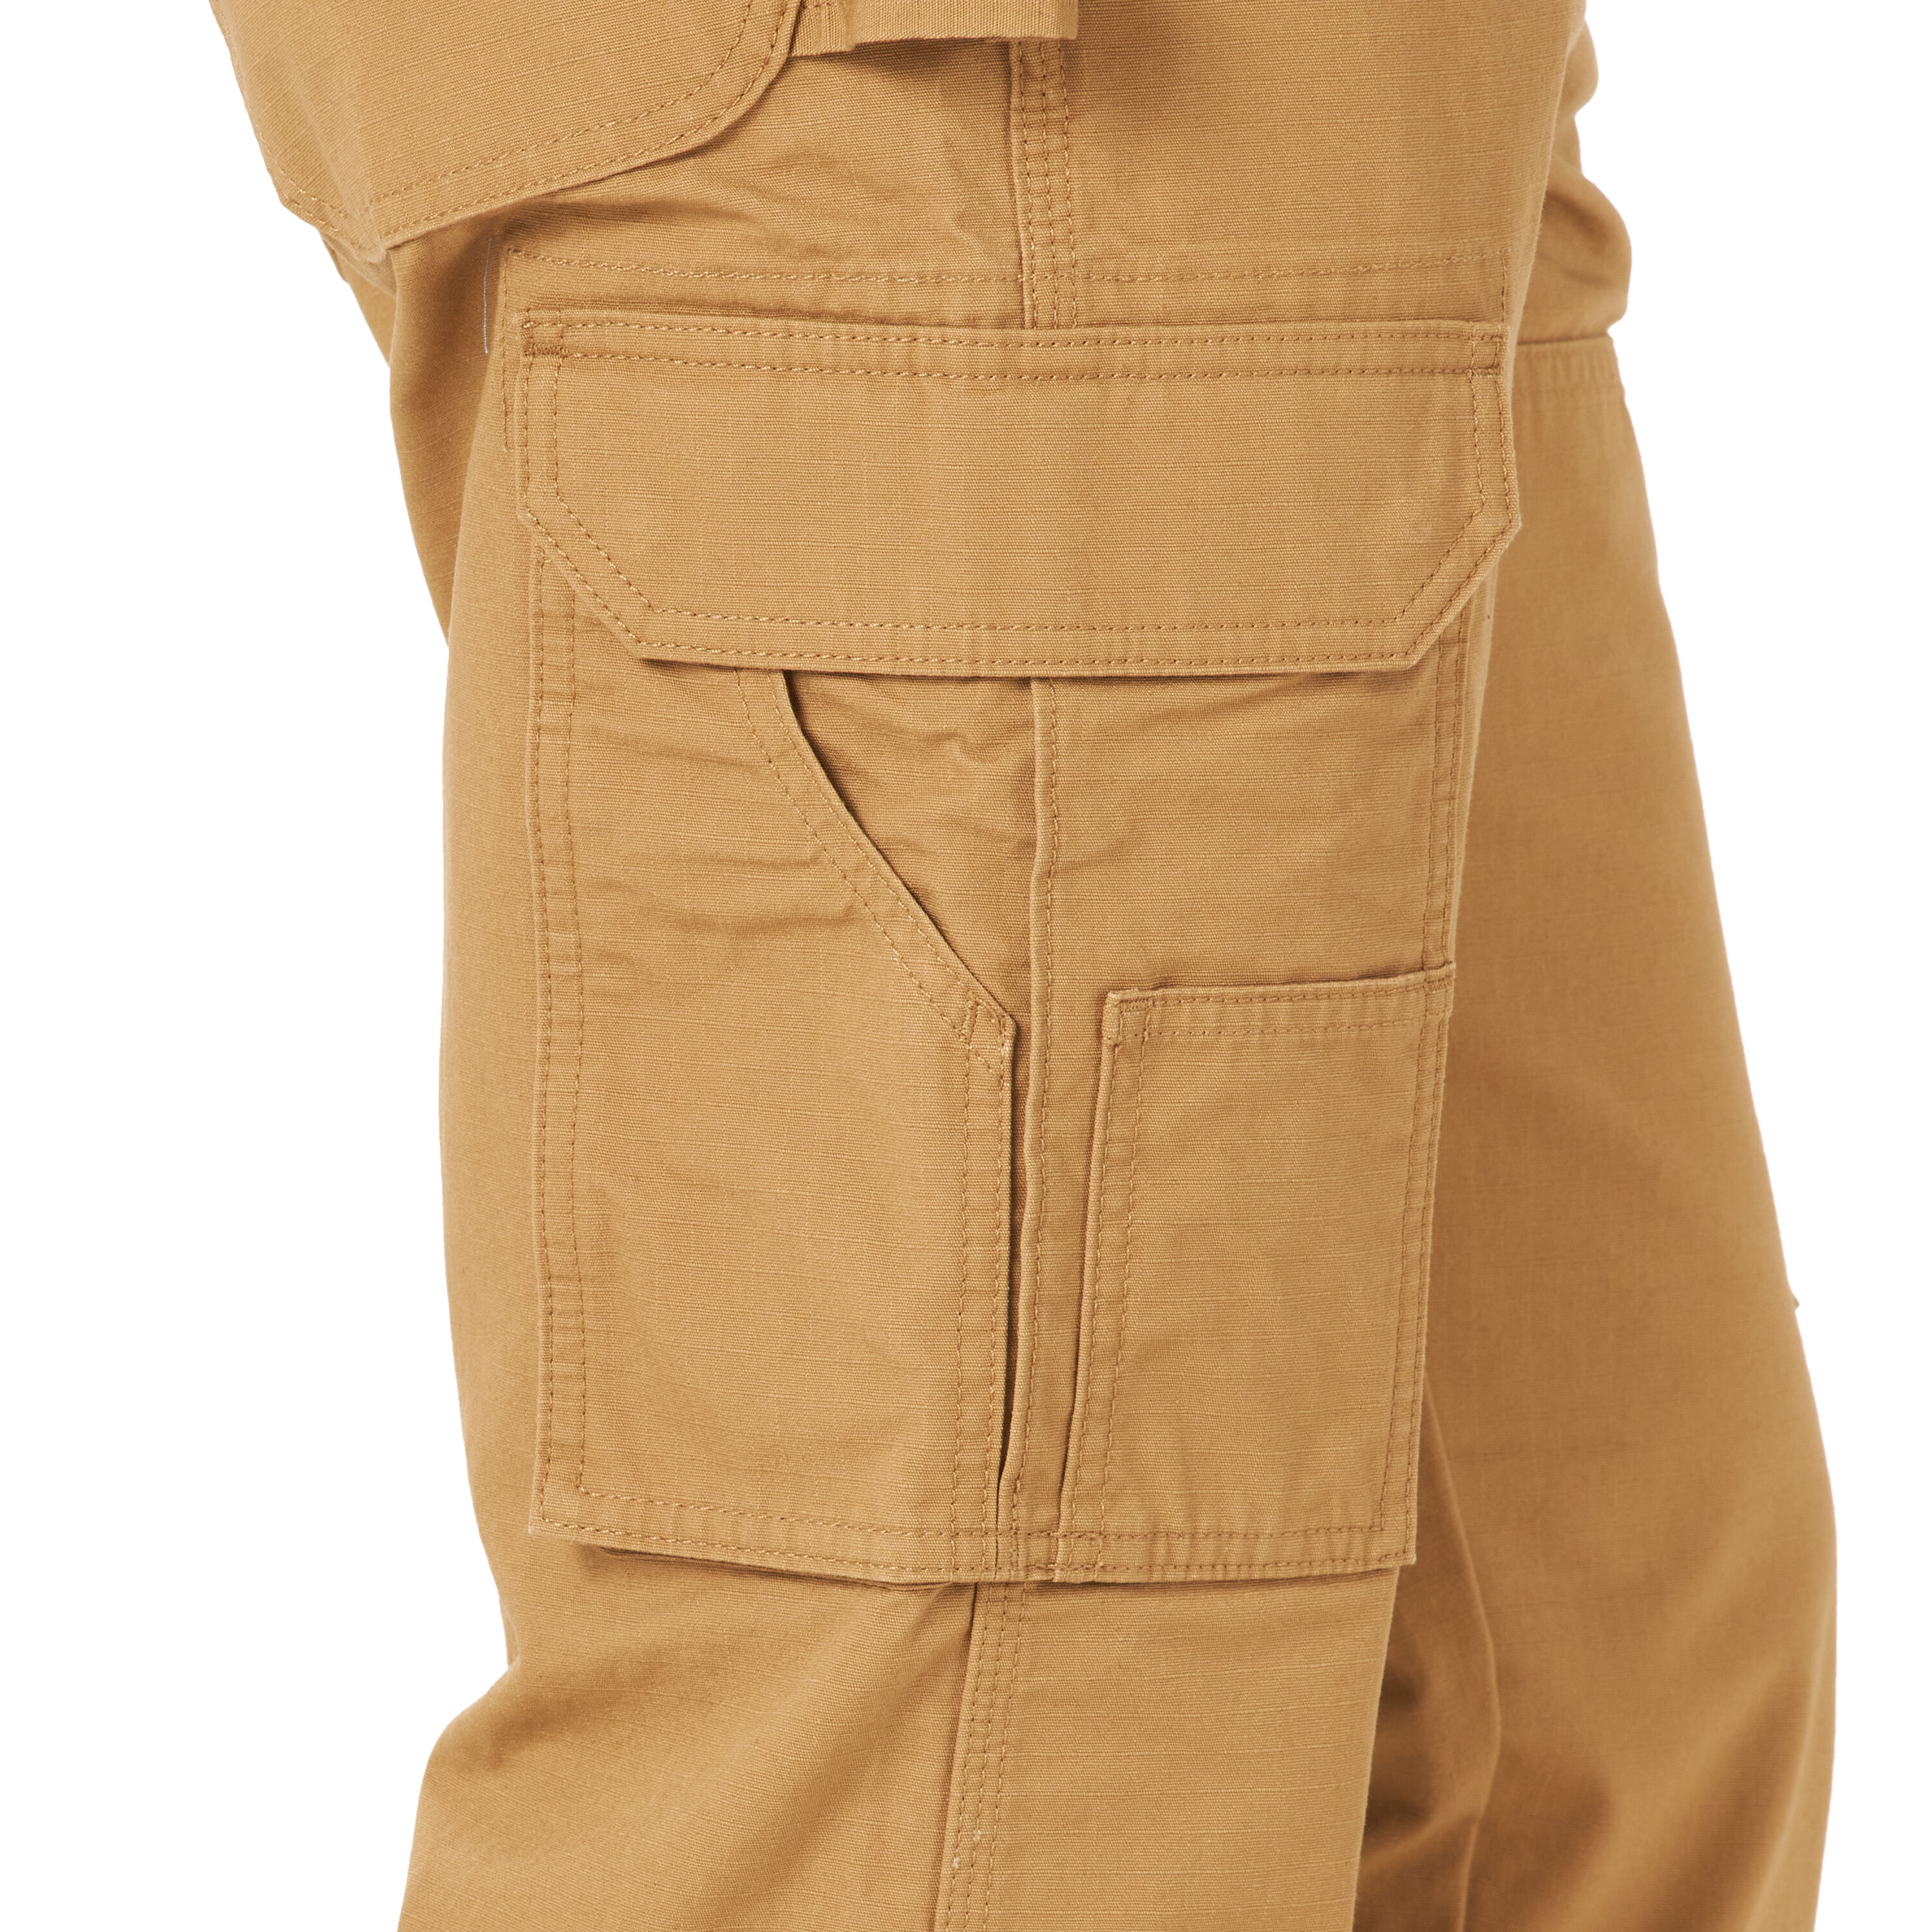 Wrangler Men's Relaxed Fit Rawhide Textured Cotton Cargo Work